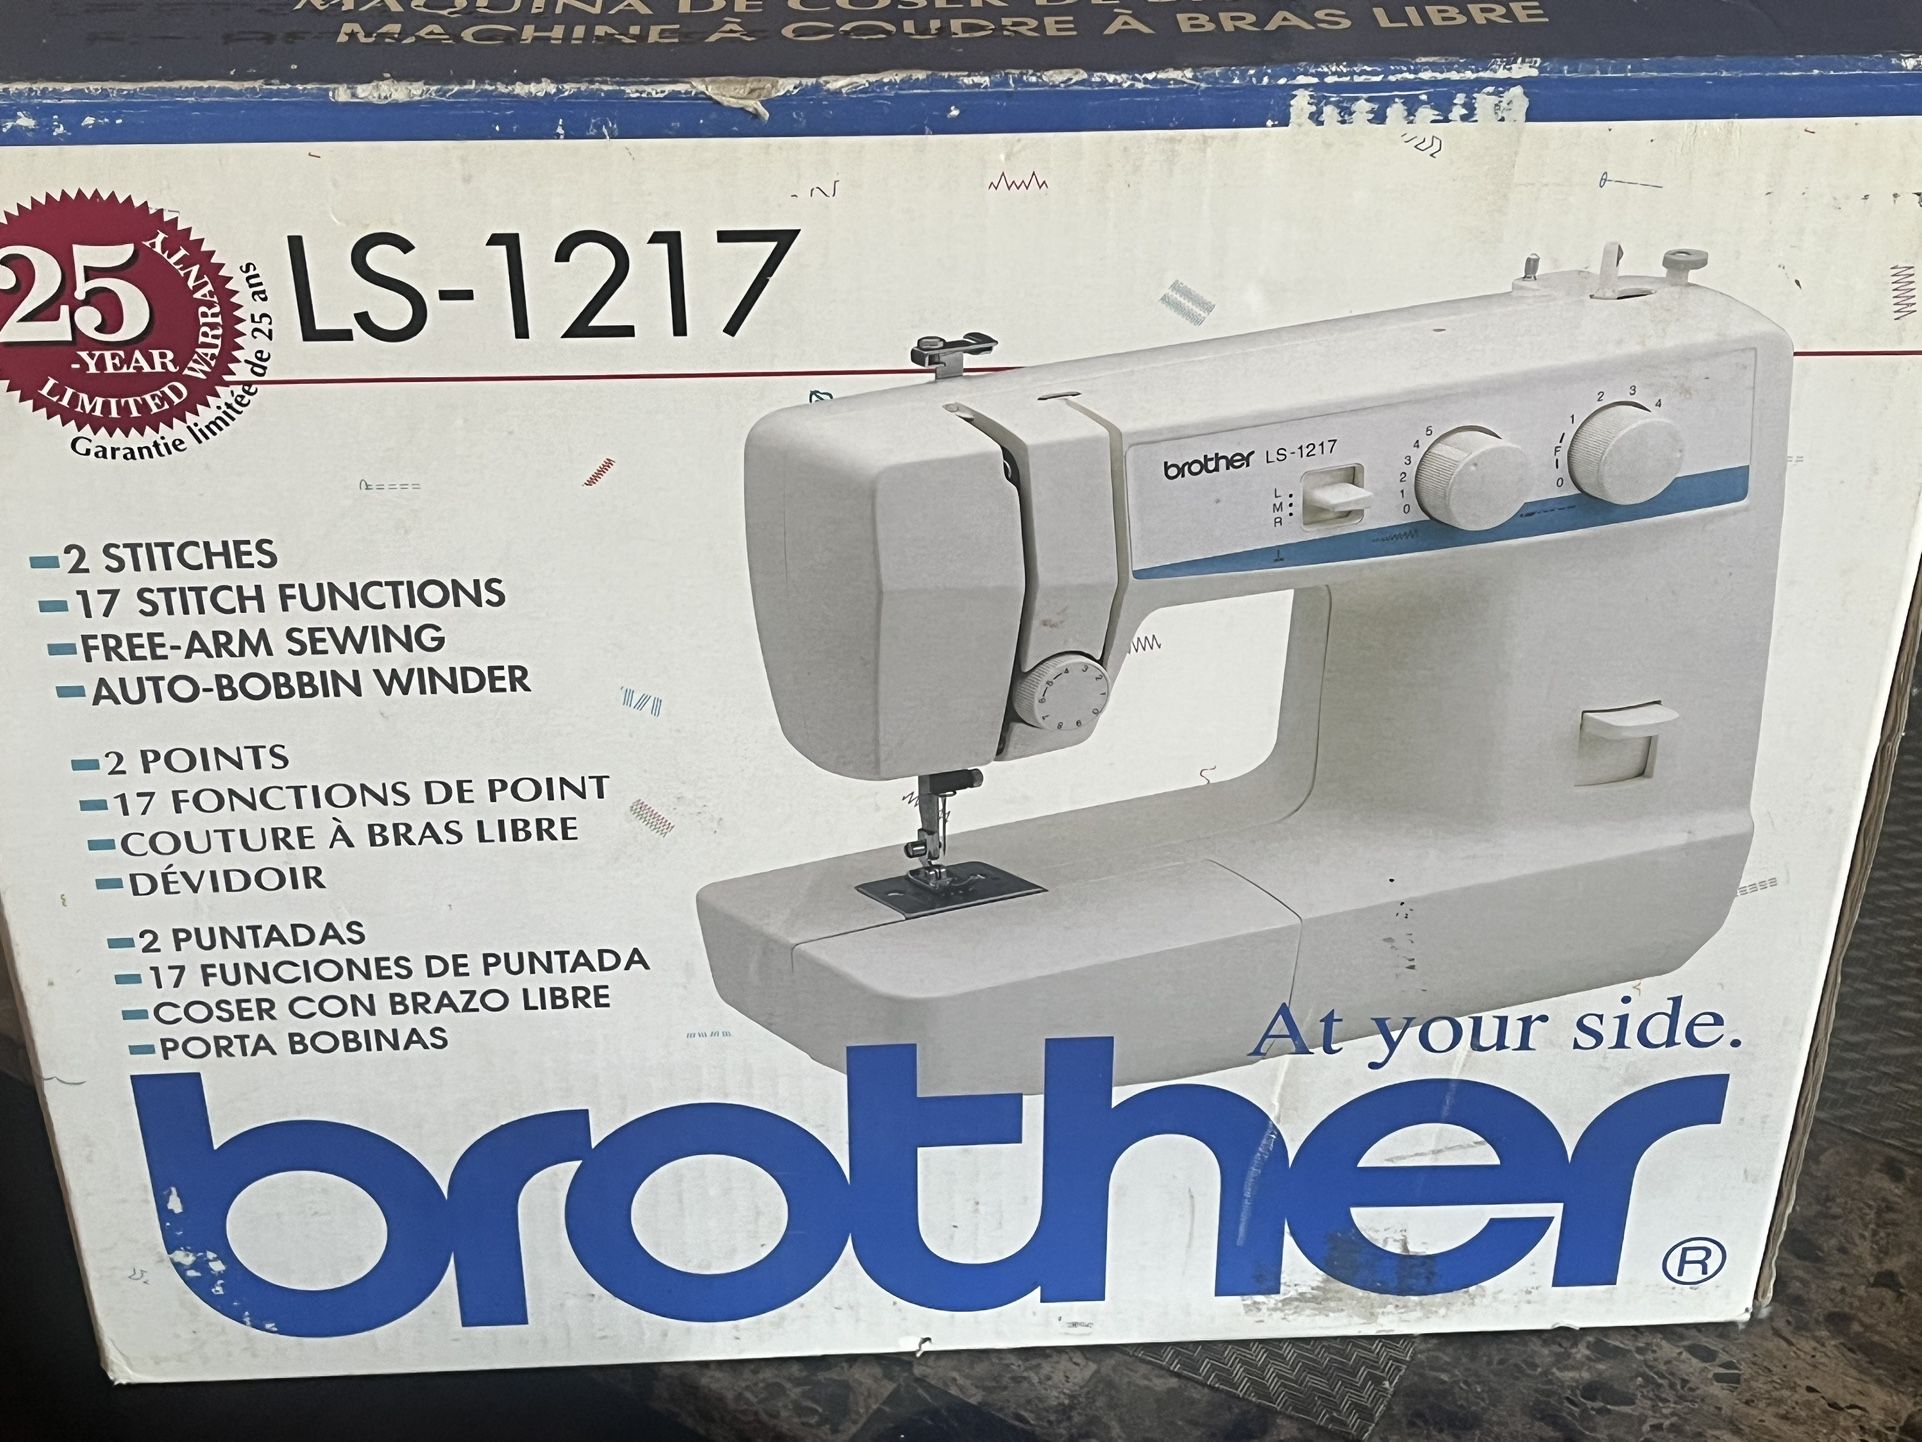 LS-1217 Brother 